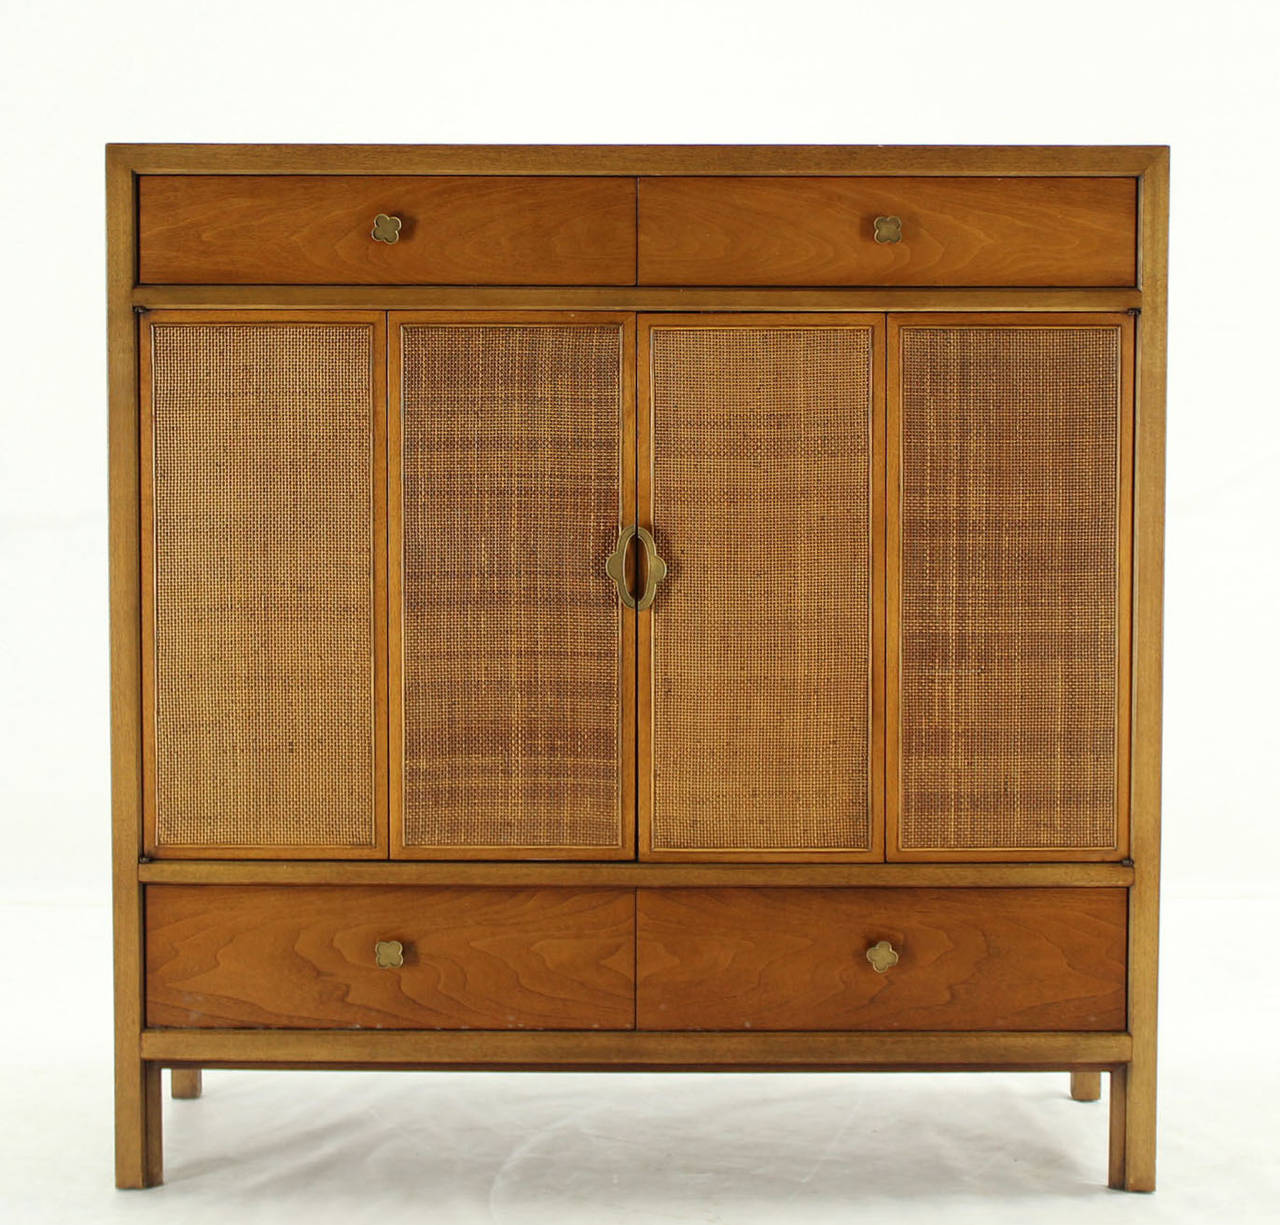 Caned two doors mid century modern chest by Henredon. Light satinwood finish. Decorative figural pulls.